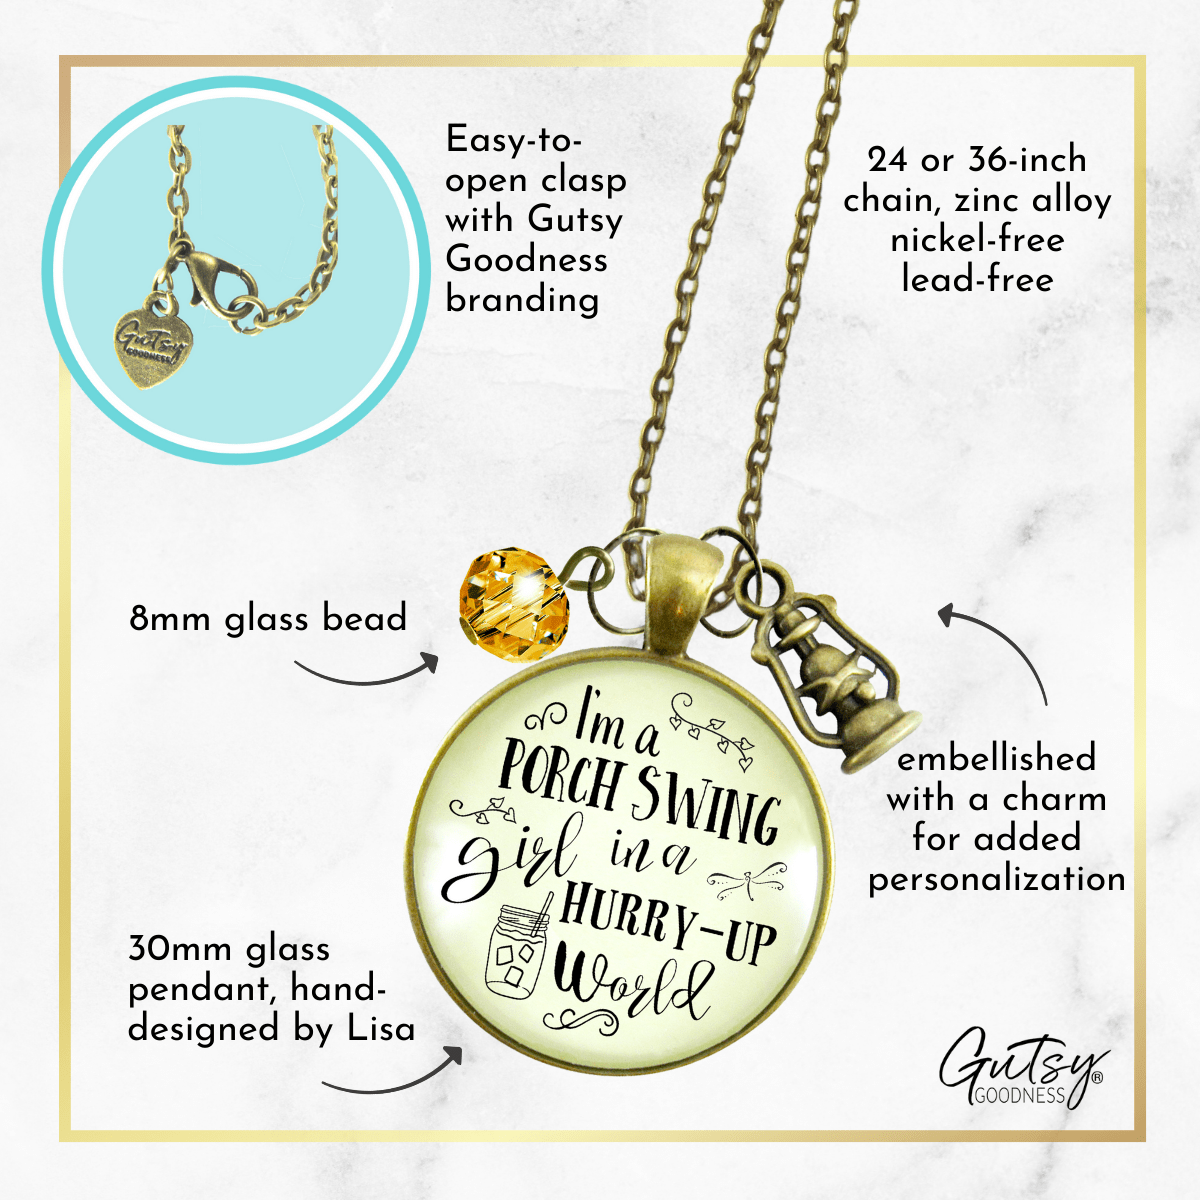 Gutsy Goodness I'm a Porch Swing Country Necklace Southern Life Jewelry - Gutsy Goodness Handmade Jewelry;I'm A Porch Swing Country Necklace Southern Life Jewelry - Gutsy Goodness Handmade Jewelry Gifts